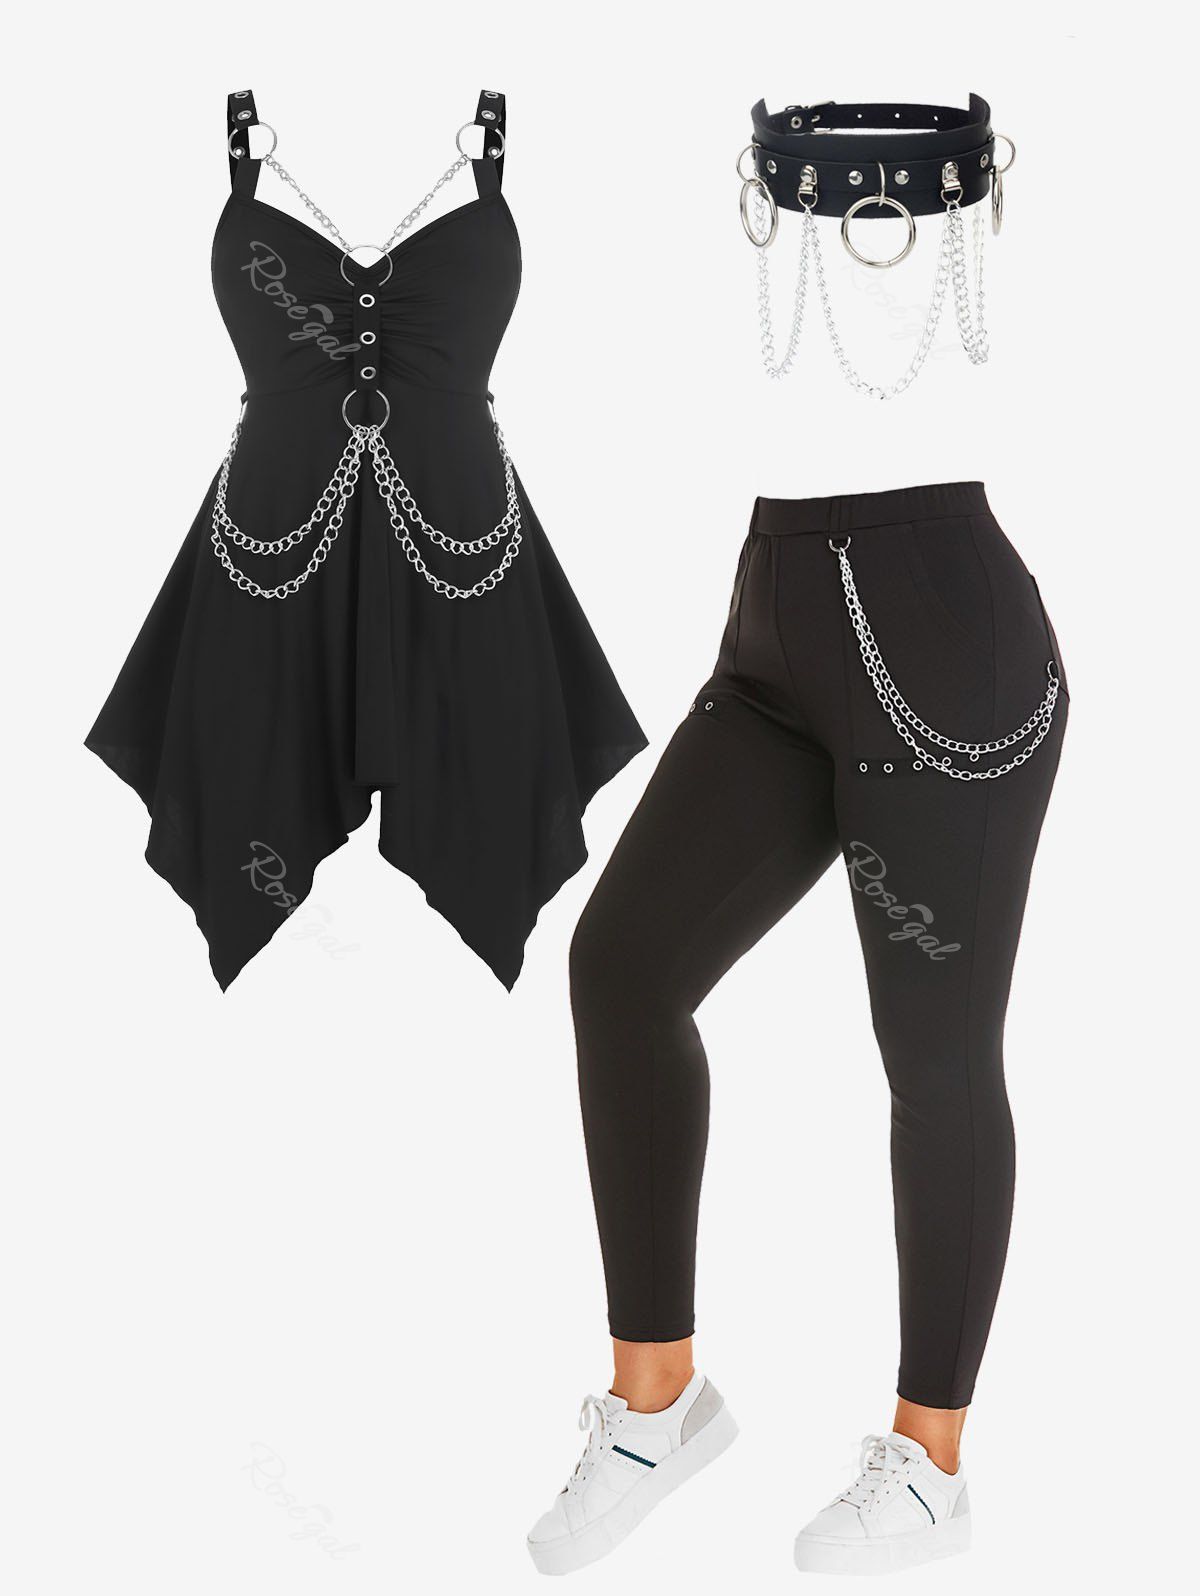 Trendy O Ring Chains Handkerchief Gothic Tank Top and Pockets Chains Eyelet Pants with Accessories Plus Size Summer Outfit  